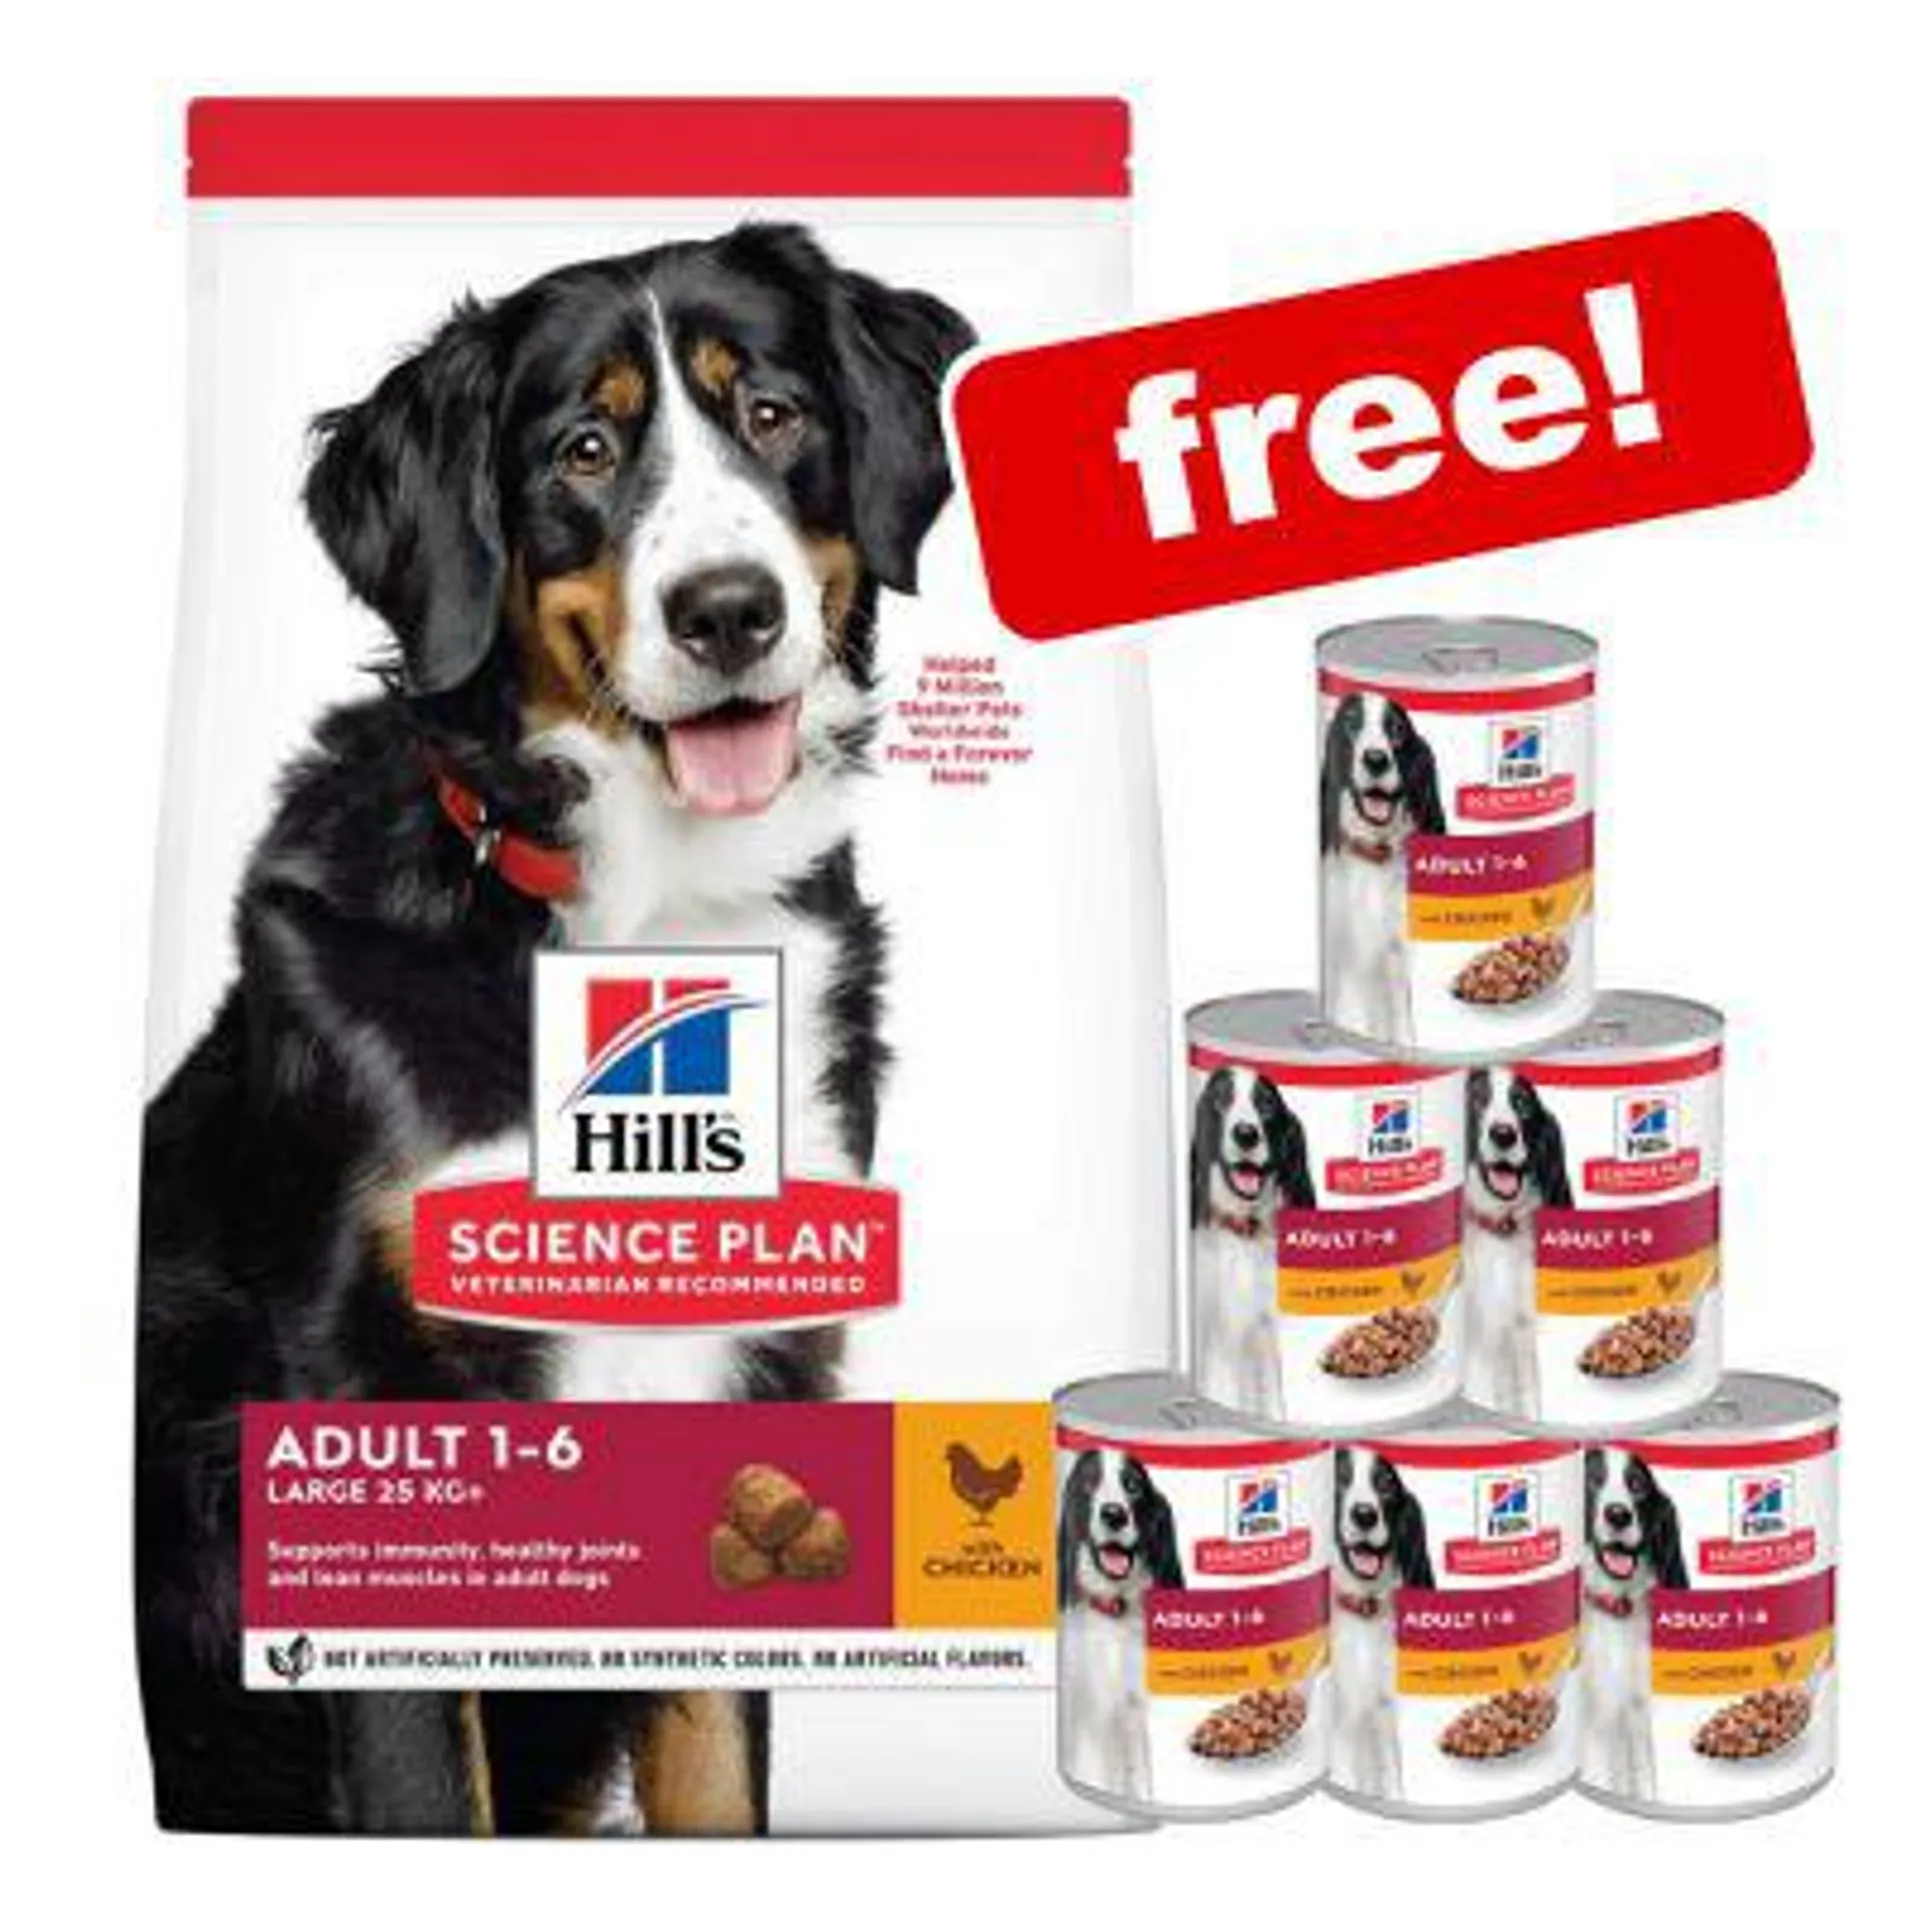 Hill's Science Plan Dry Dog Food + 6 x Hill's Wet Food Cans Free!*